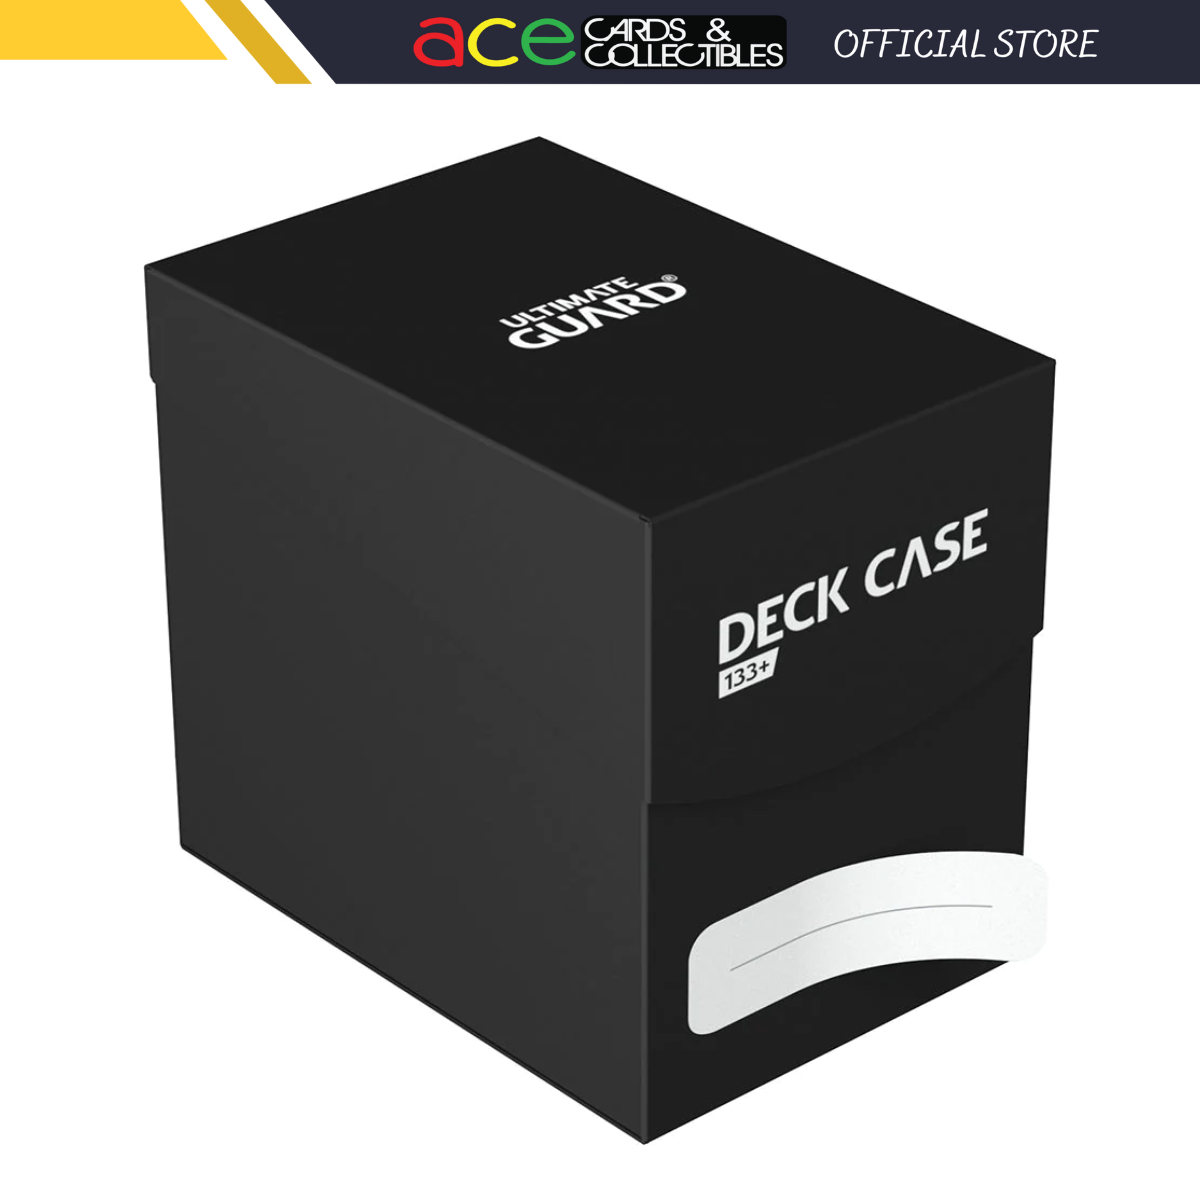 Ultimate Guard Deck Case 133+ Standard Size - Black (Deck Box)-Ultimate Guard-Ace Cards &amp; Collectibles